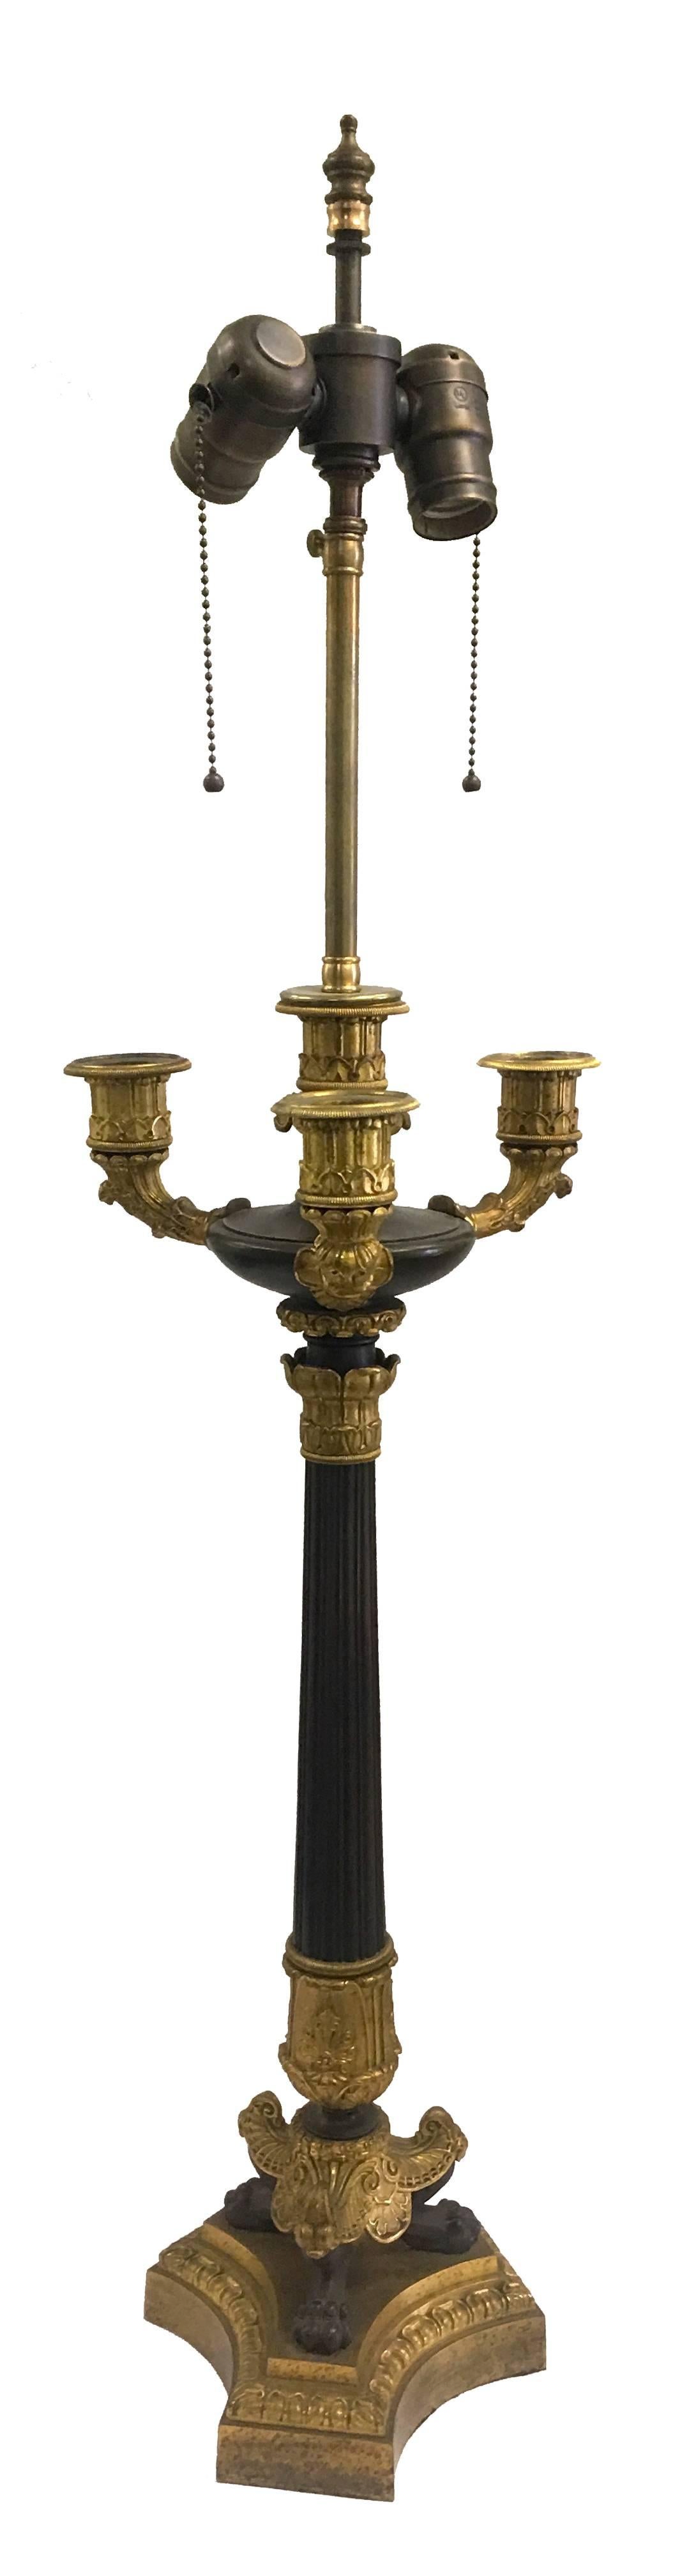 19th century French Empire ormolu and patinated bronze converted candelabra lamps. Center reeded column stem on a tripartite base on lion paw feet.
Newly rewired with new double sockets. Each lamp takes two standard bulbs. Custom cream linen